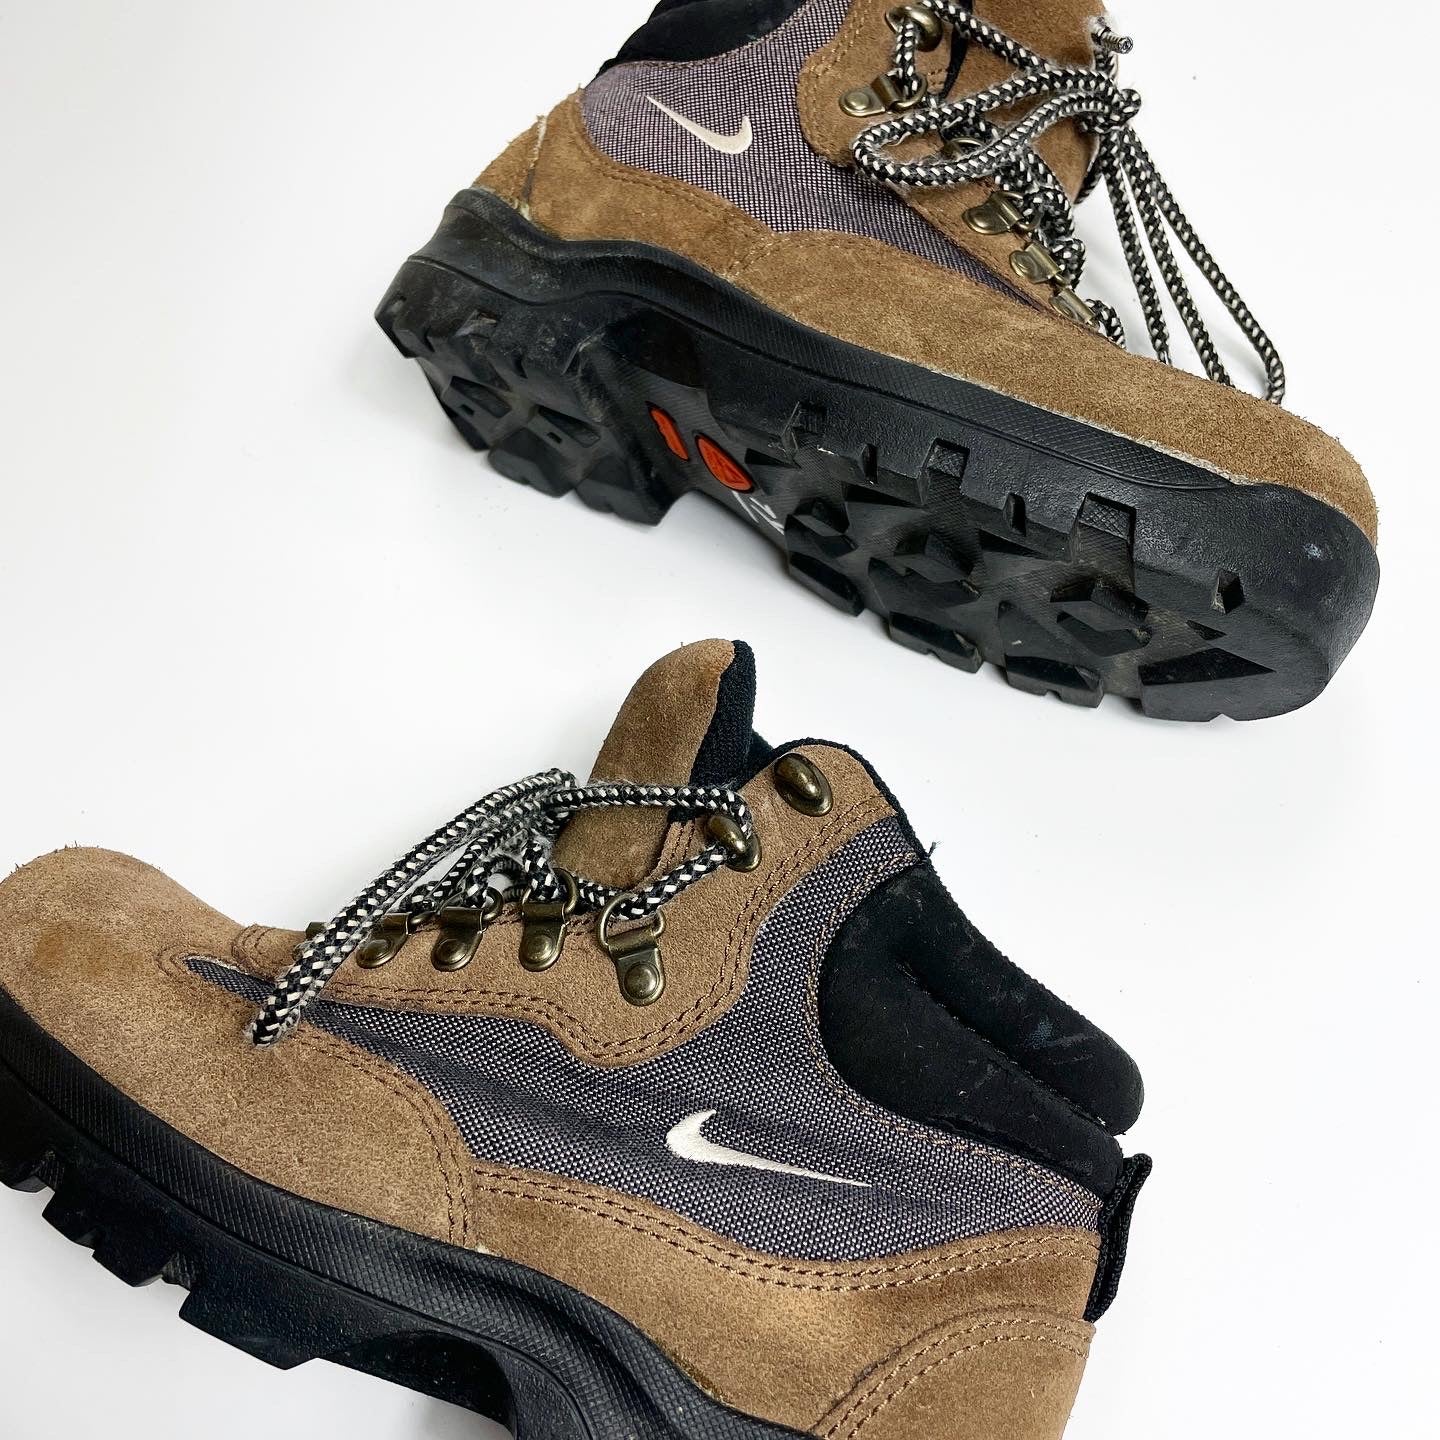 NIKE ACG BOOTS Youth Size US 7.